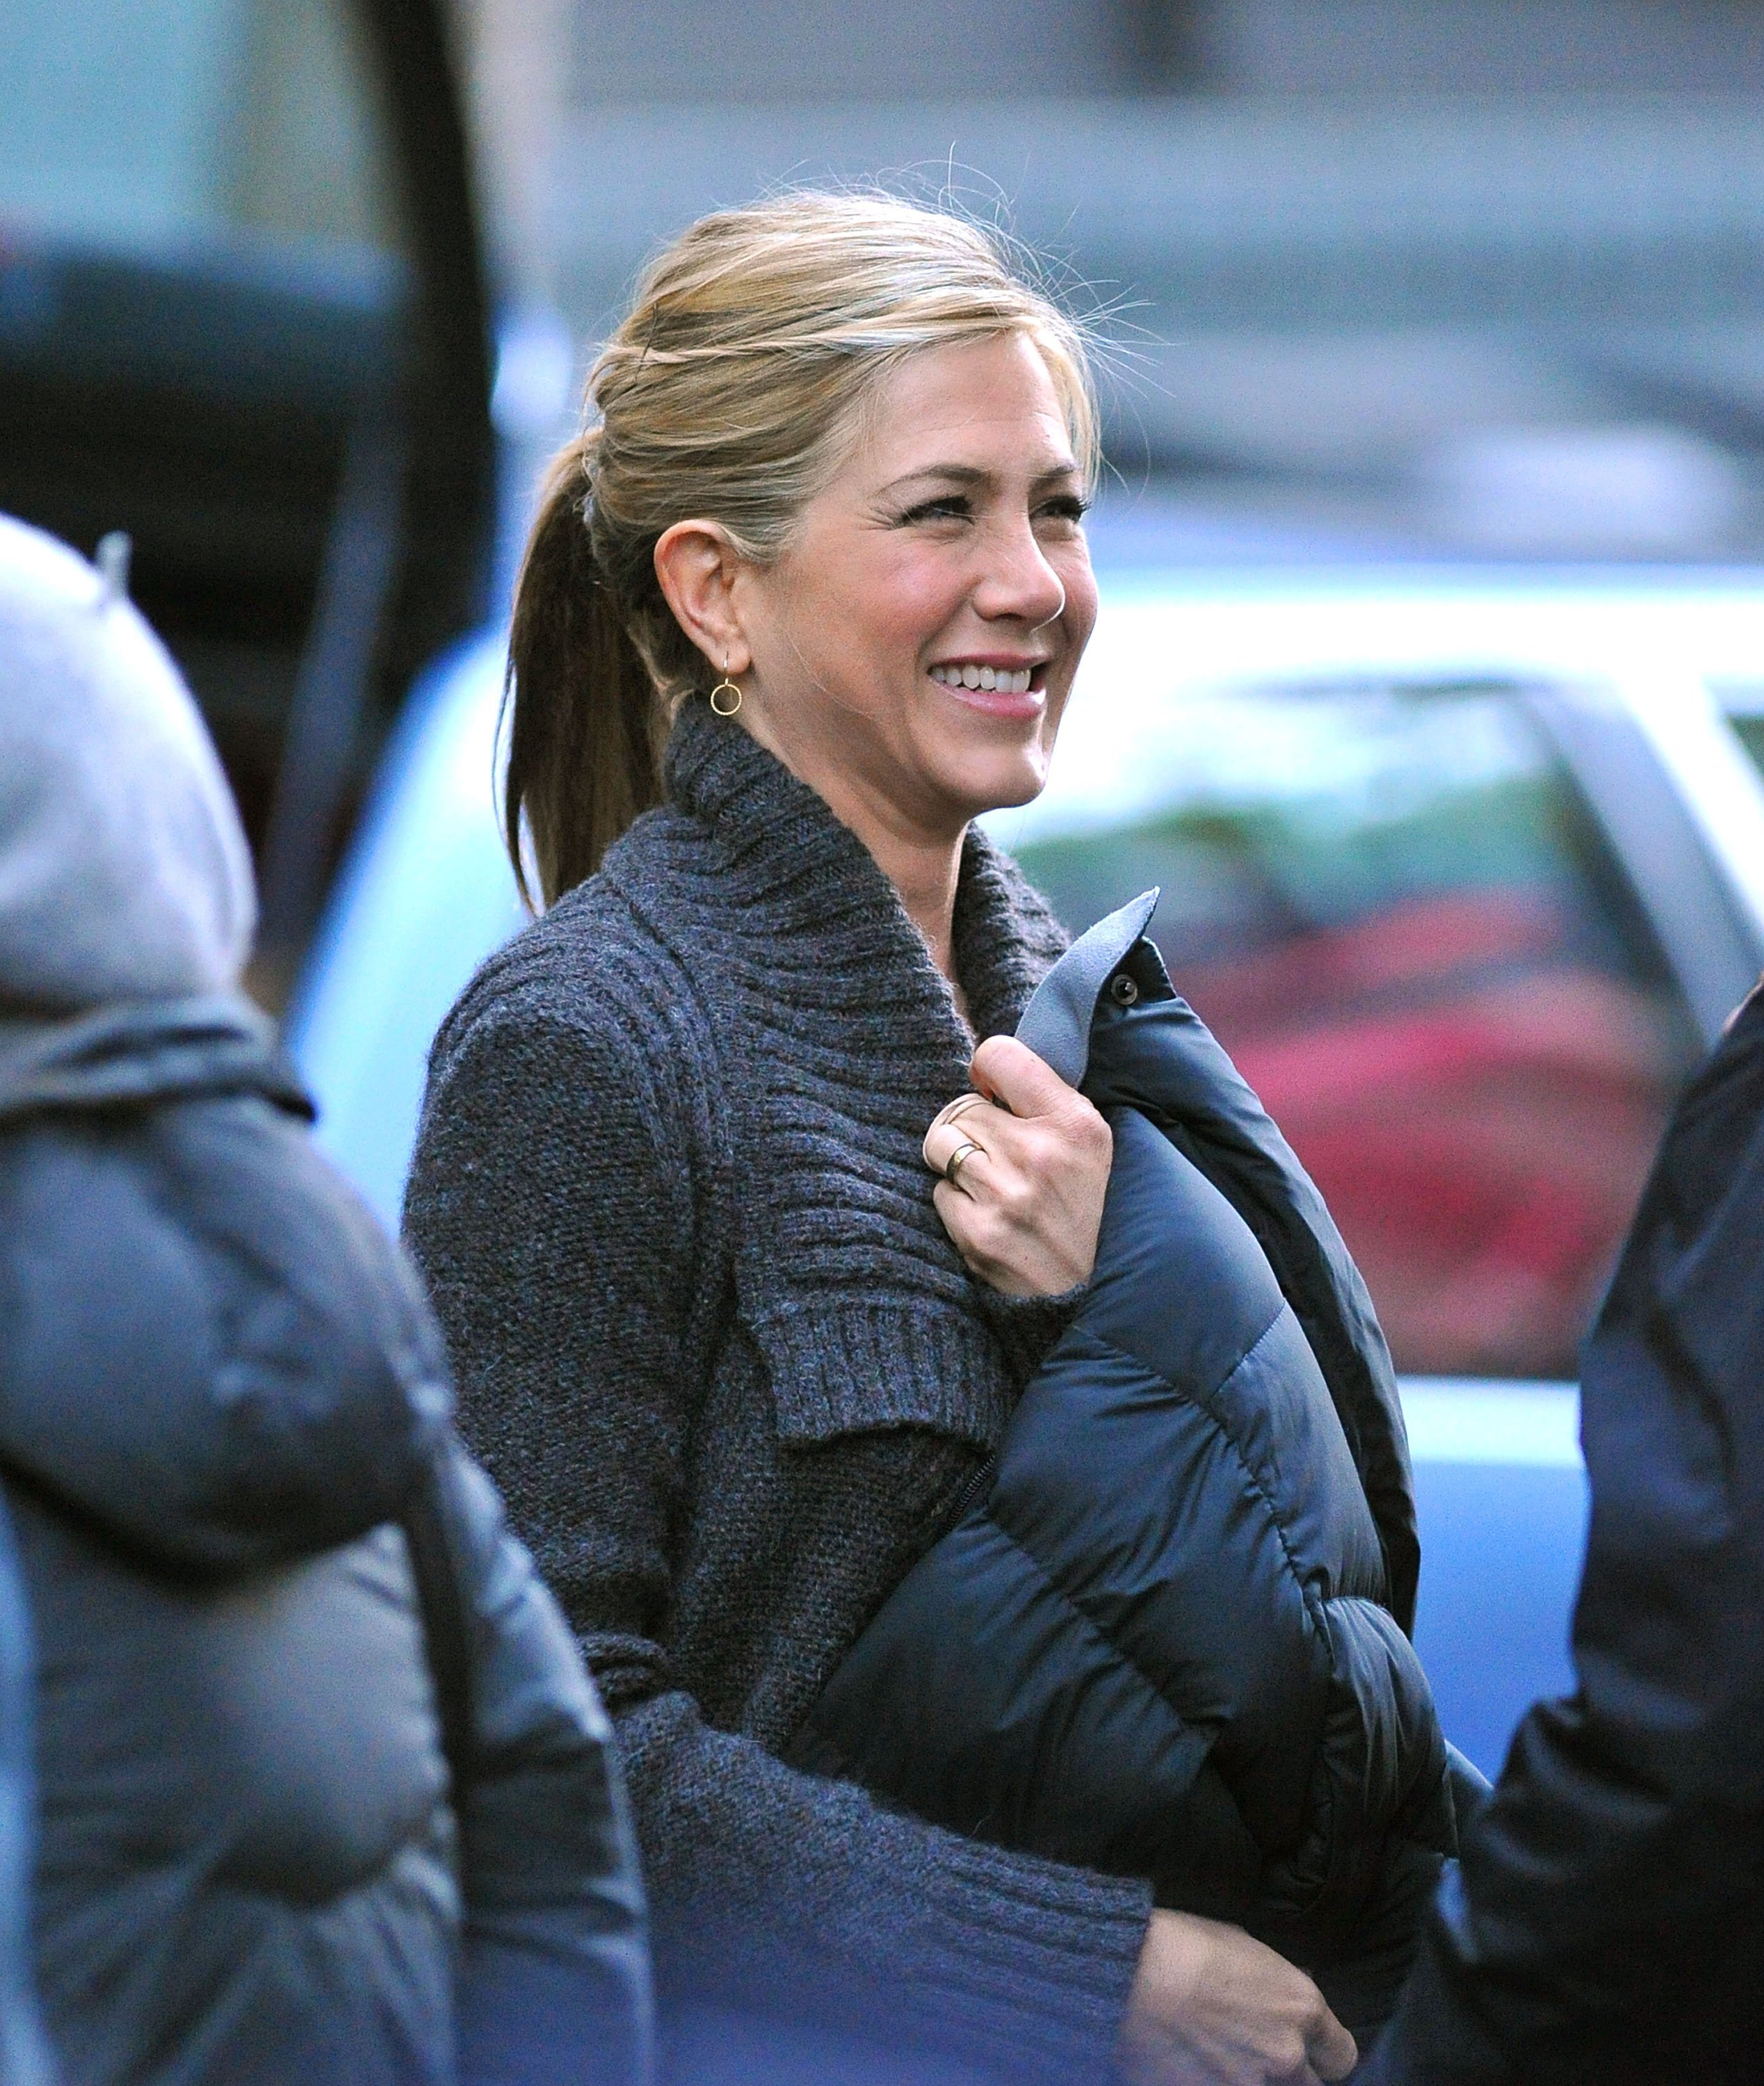 Jennifer Aniston seen on location for "Wanderlust" on the streets of Manhattan on November 19, 2010 in New York City. | Source: Getty Images